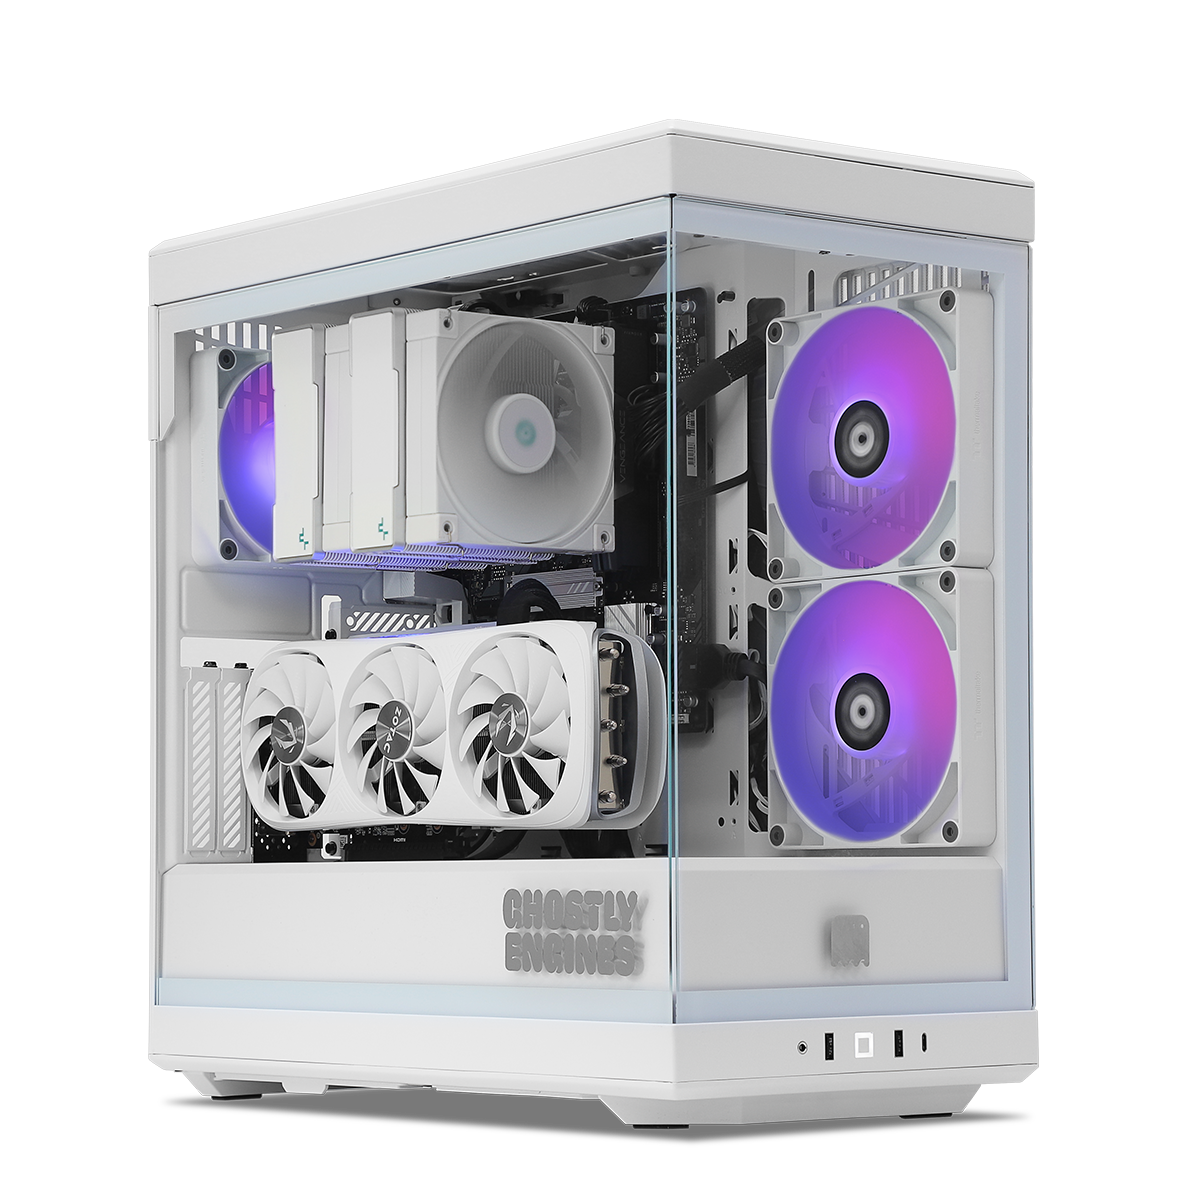 GE RTX 4070 Ti SUPER Gaming PC – Ghostly Engines